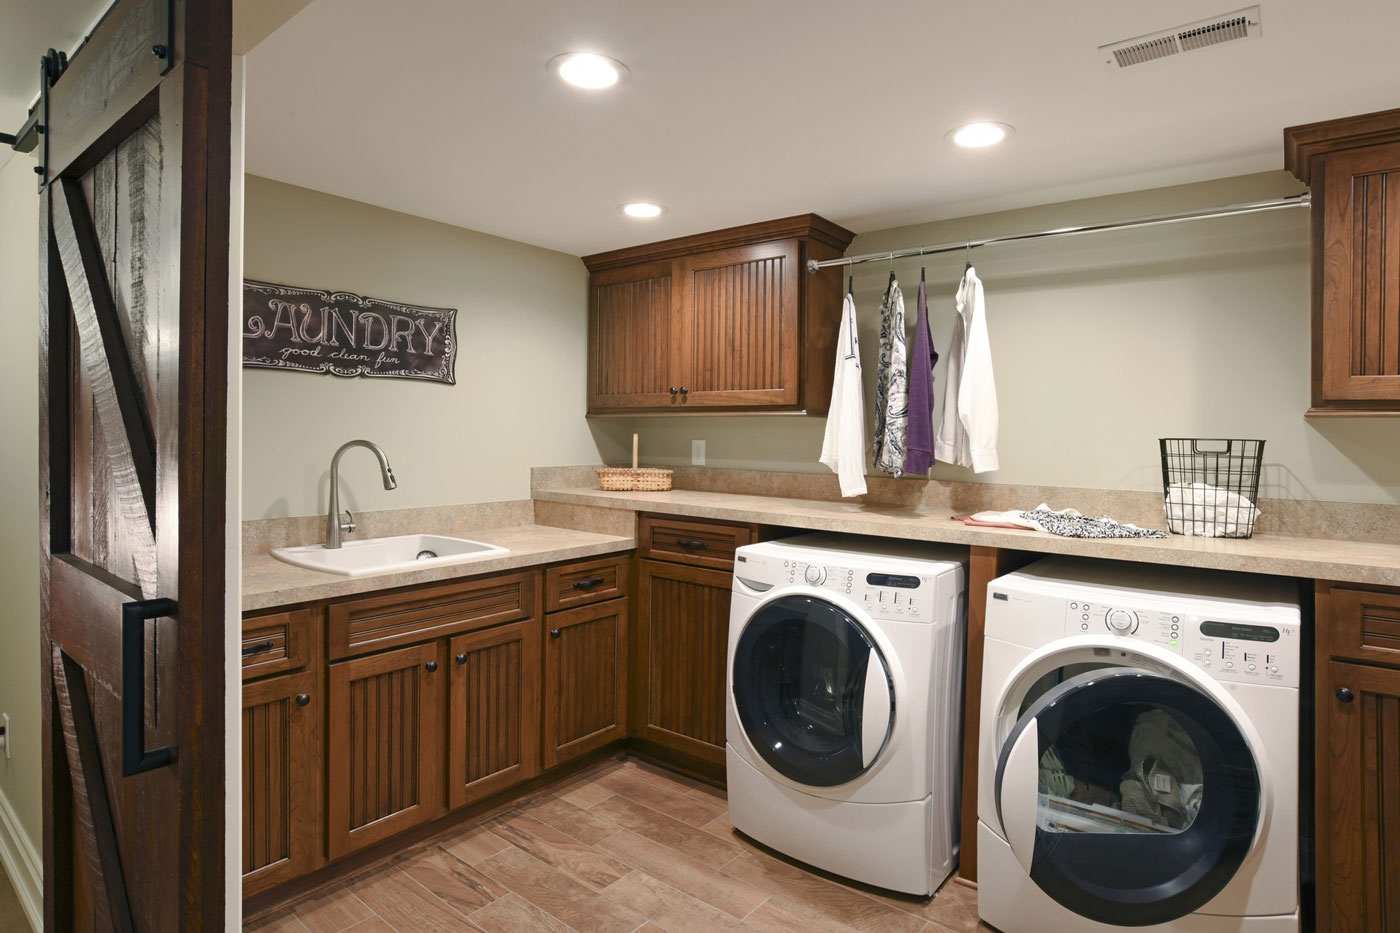 Remodeled basement laundry room with high-end appliances and new cabinets